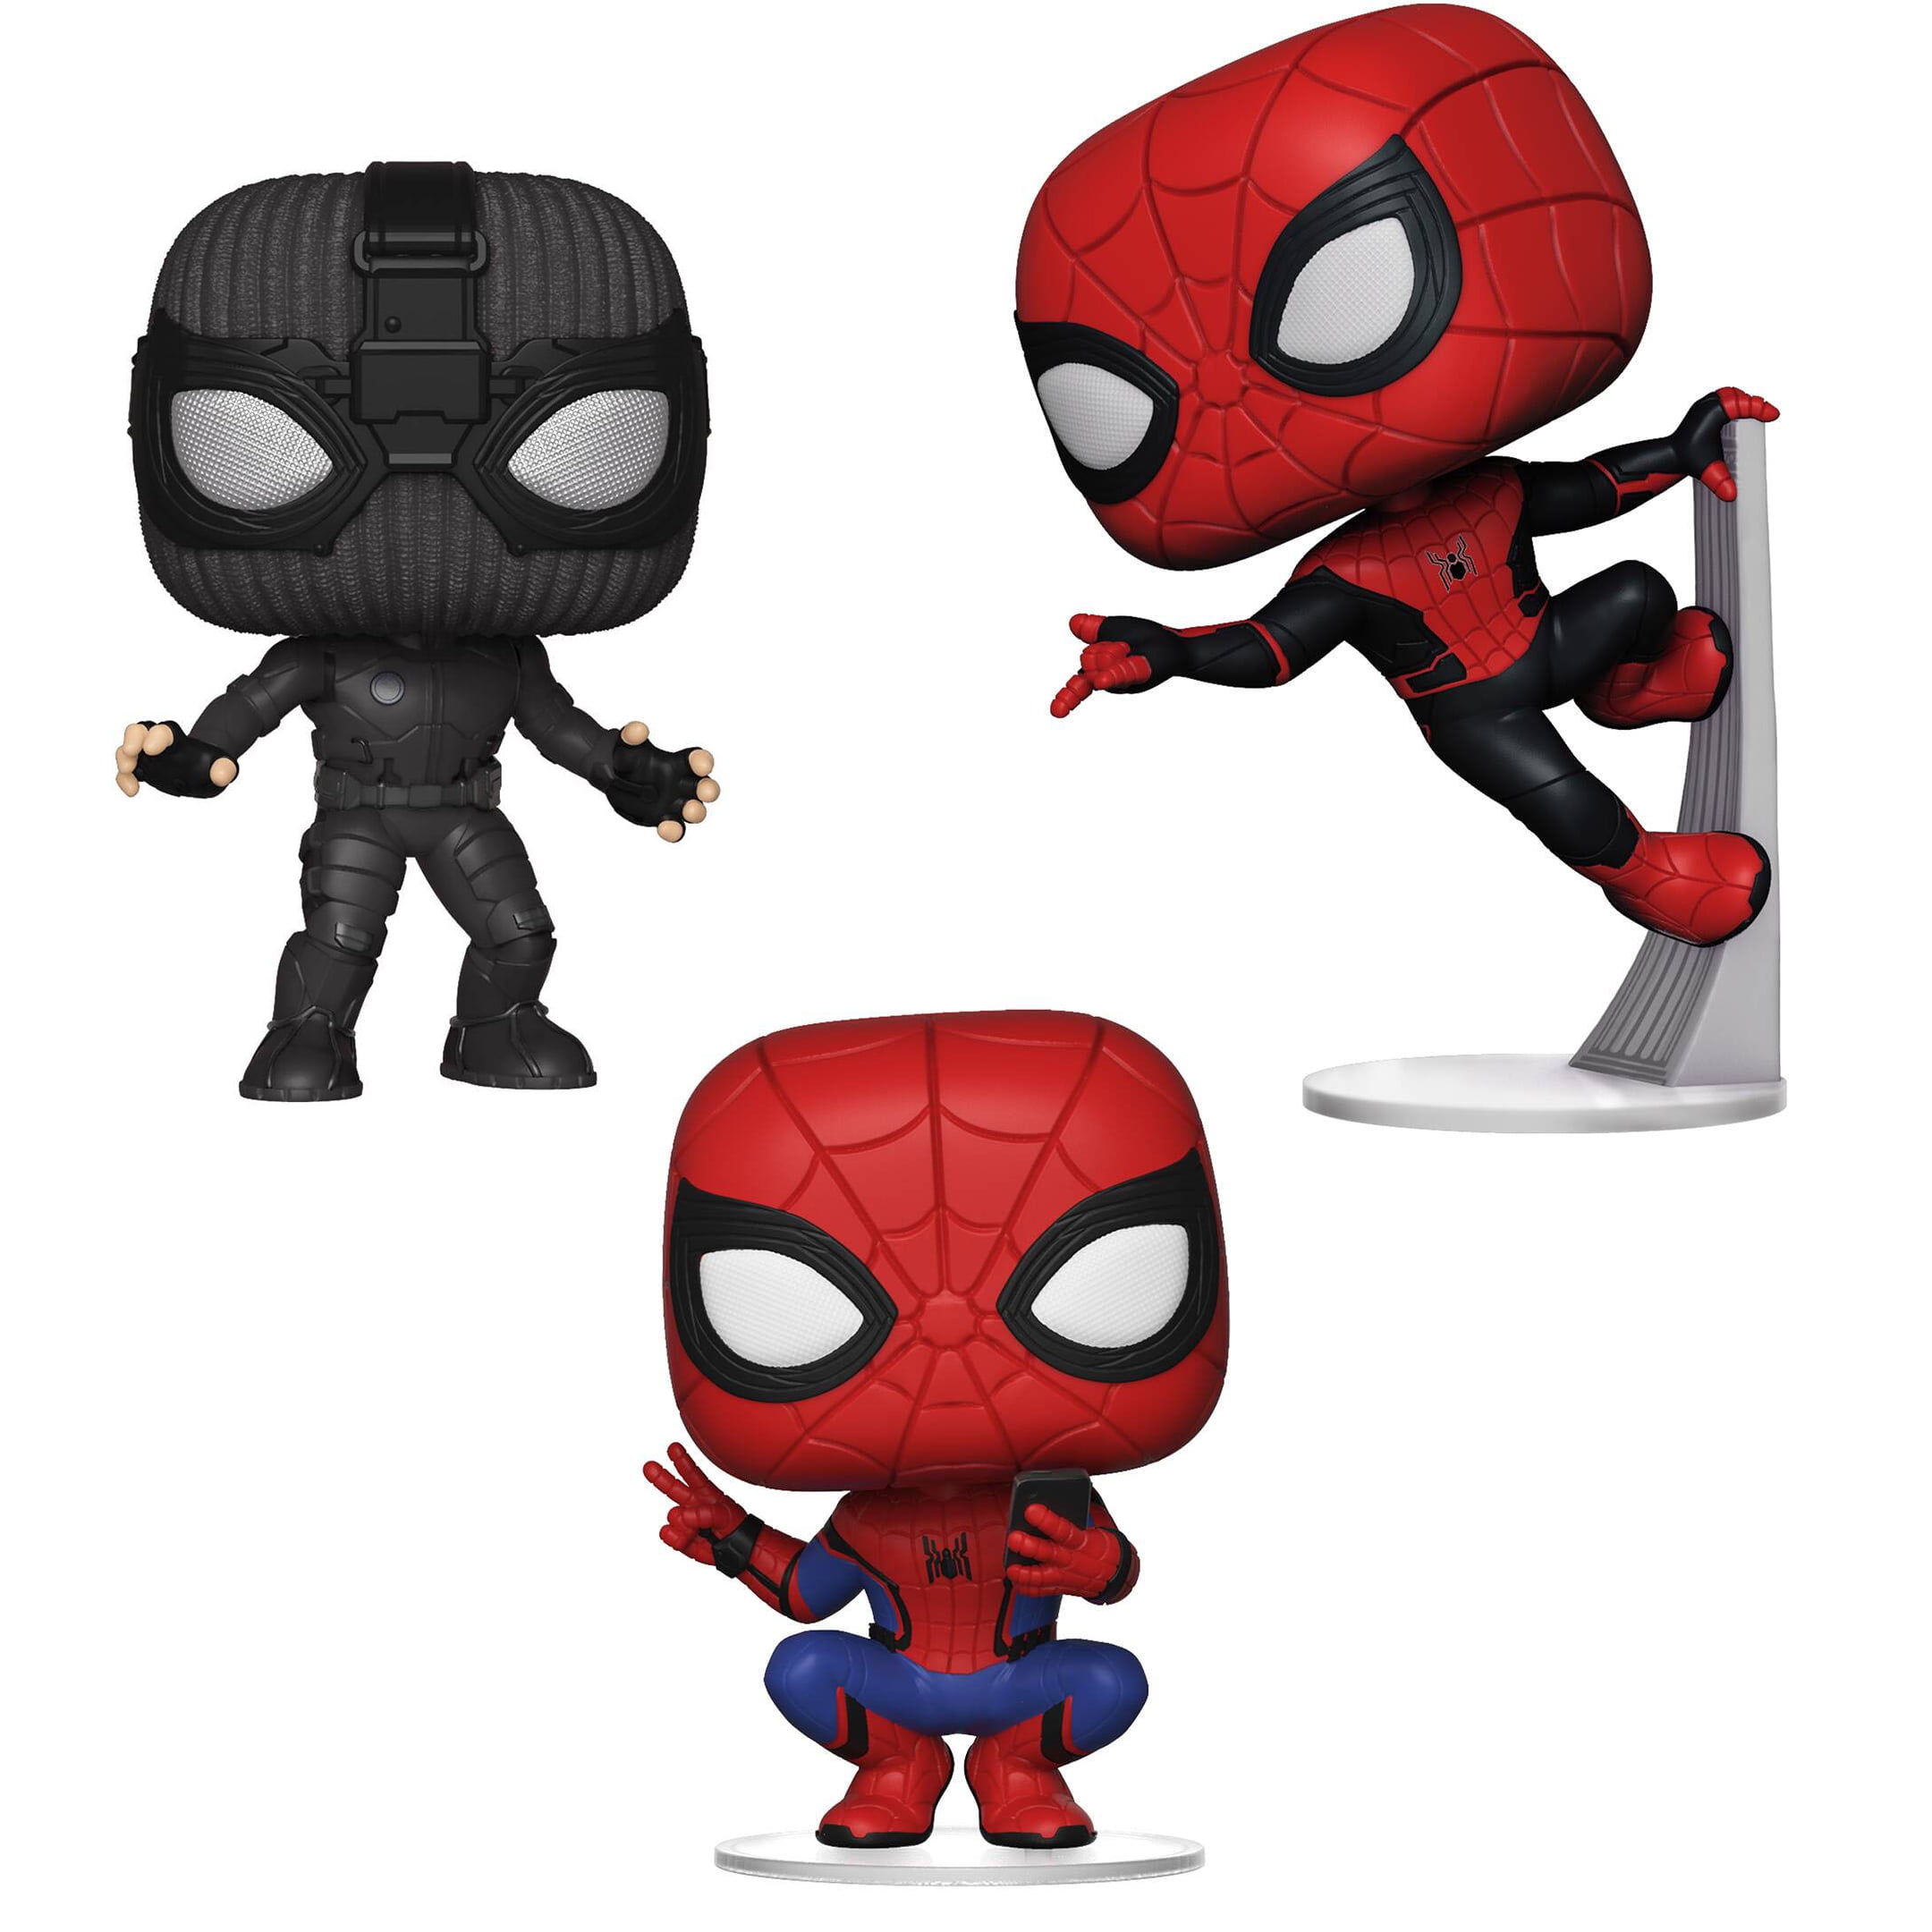 US-FL]Walmart on highway 192 in Kissimmee by Medieval Times has one  Spider-man Homecoming bundle left : r/funkopop